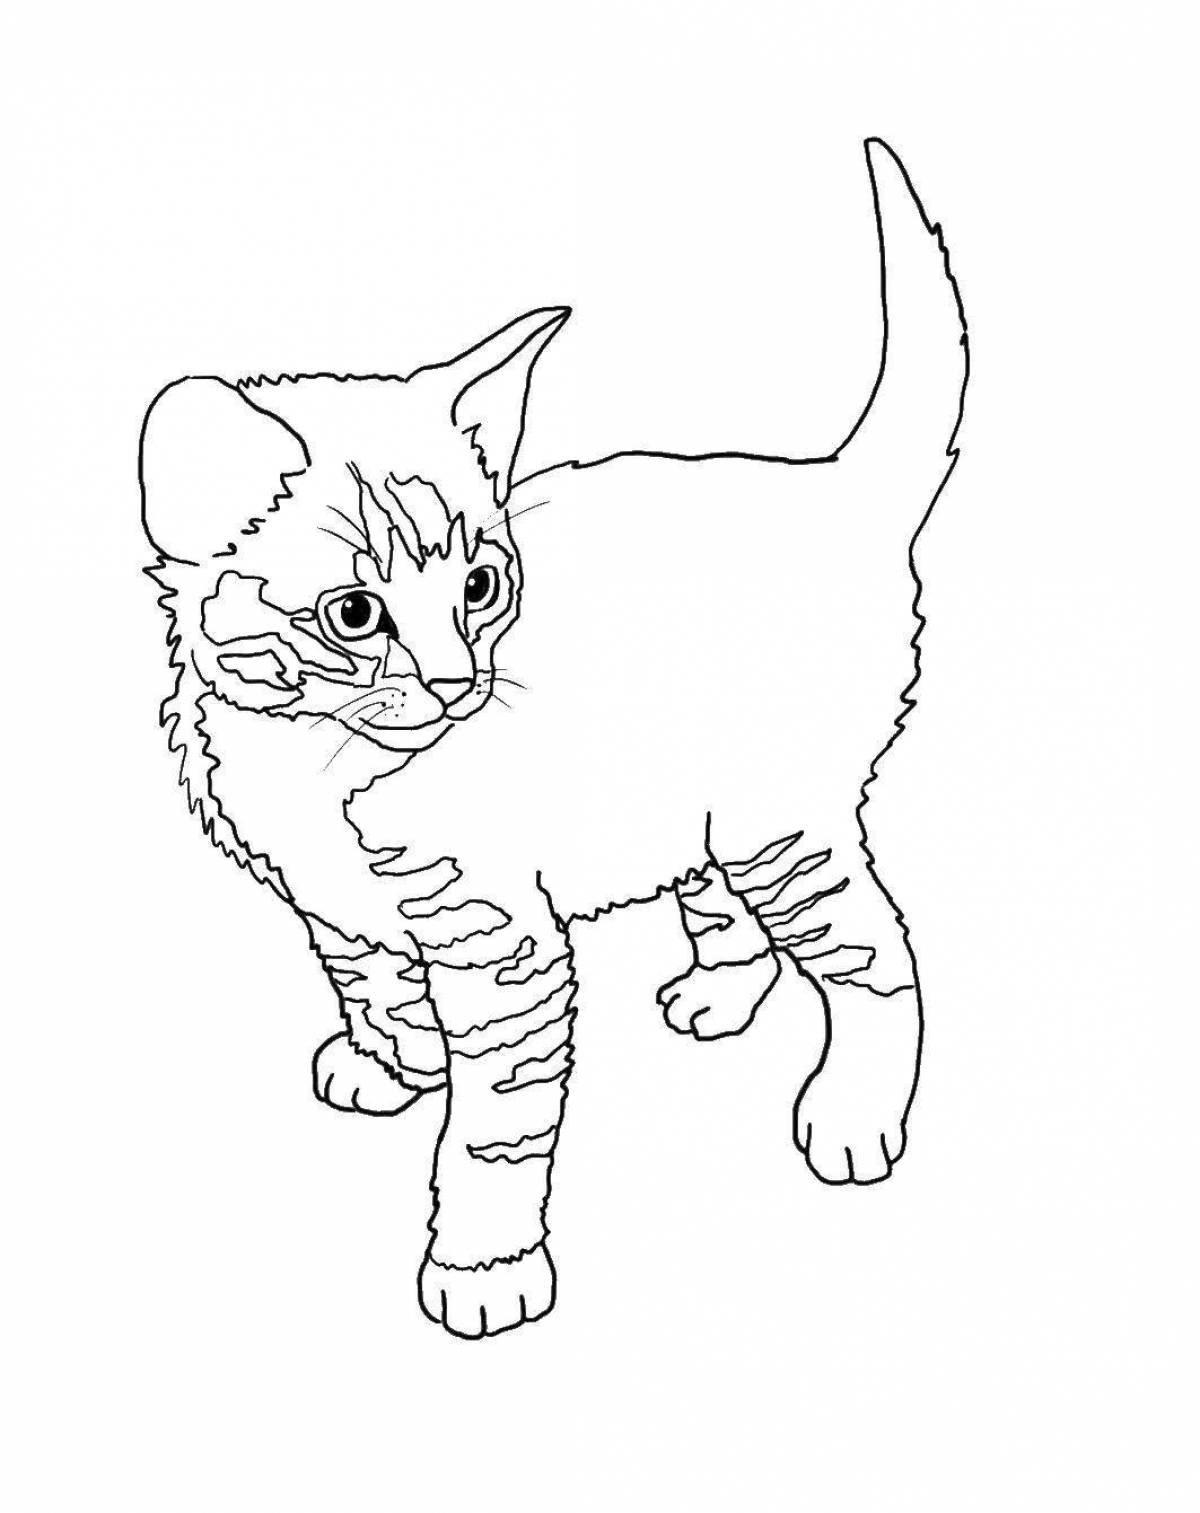 Fun coloring cat for children 6-7 years old